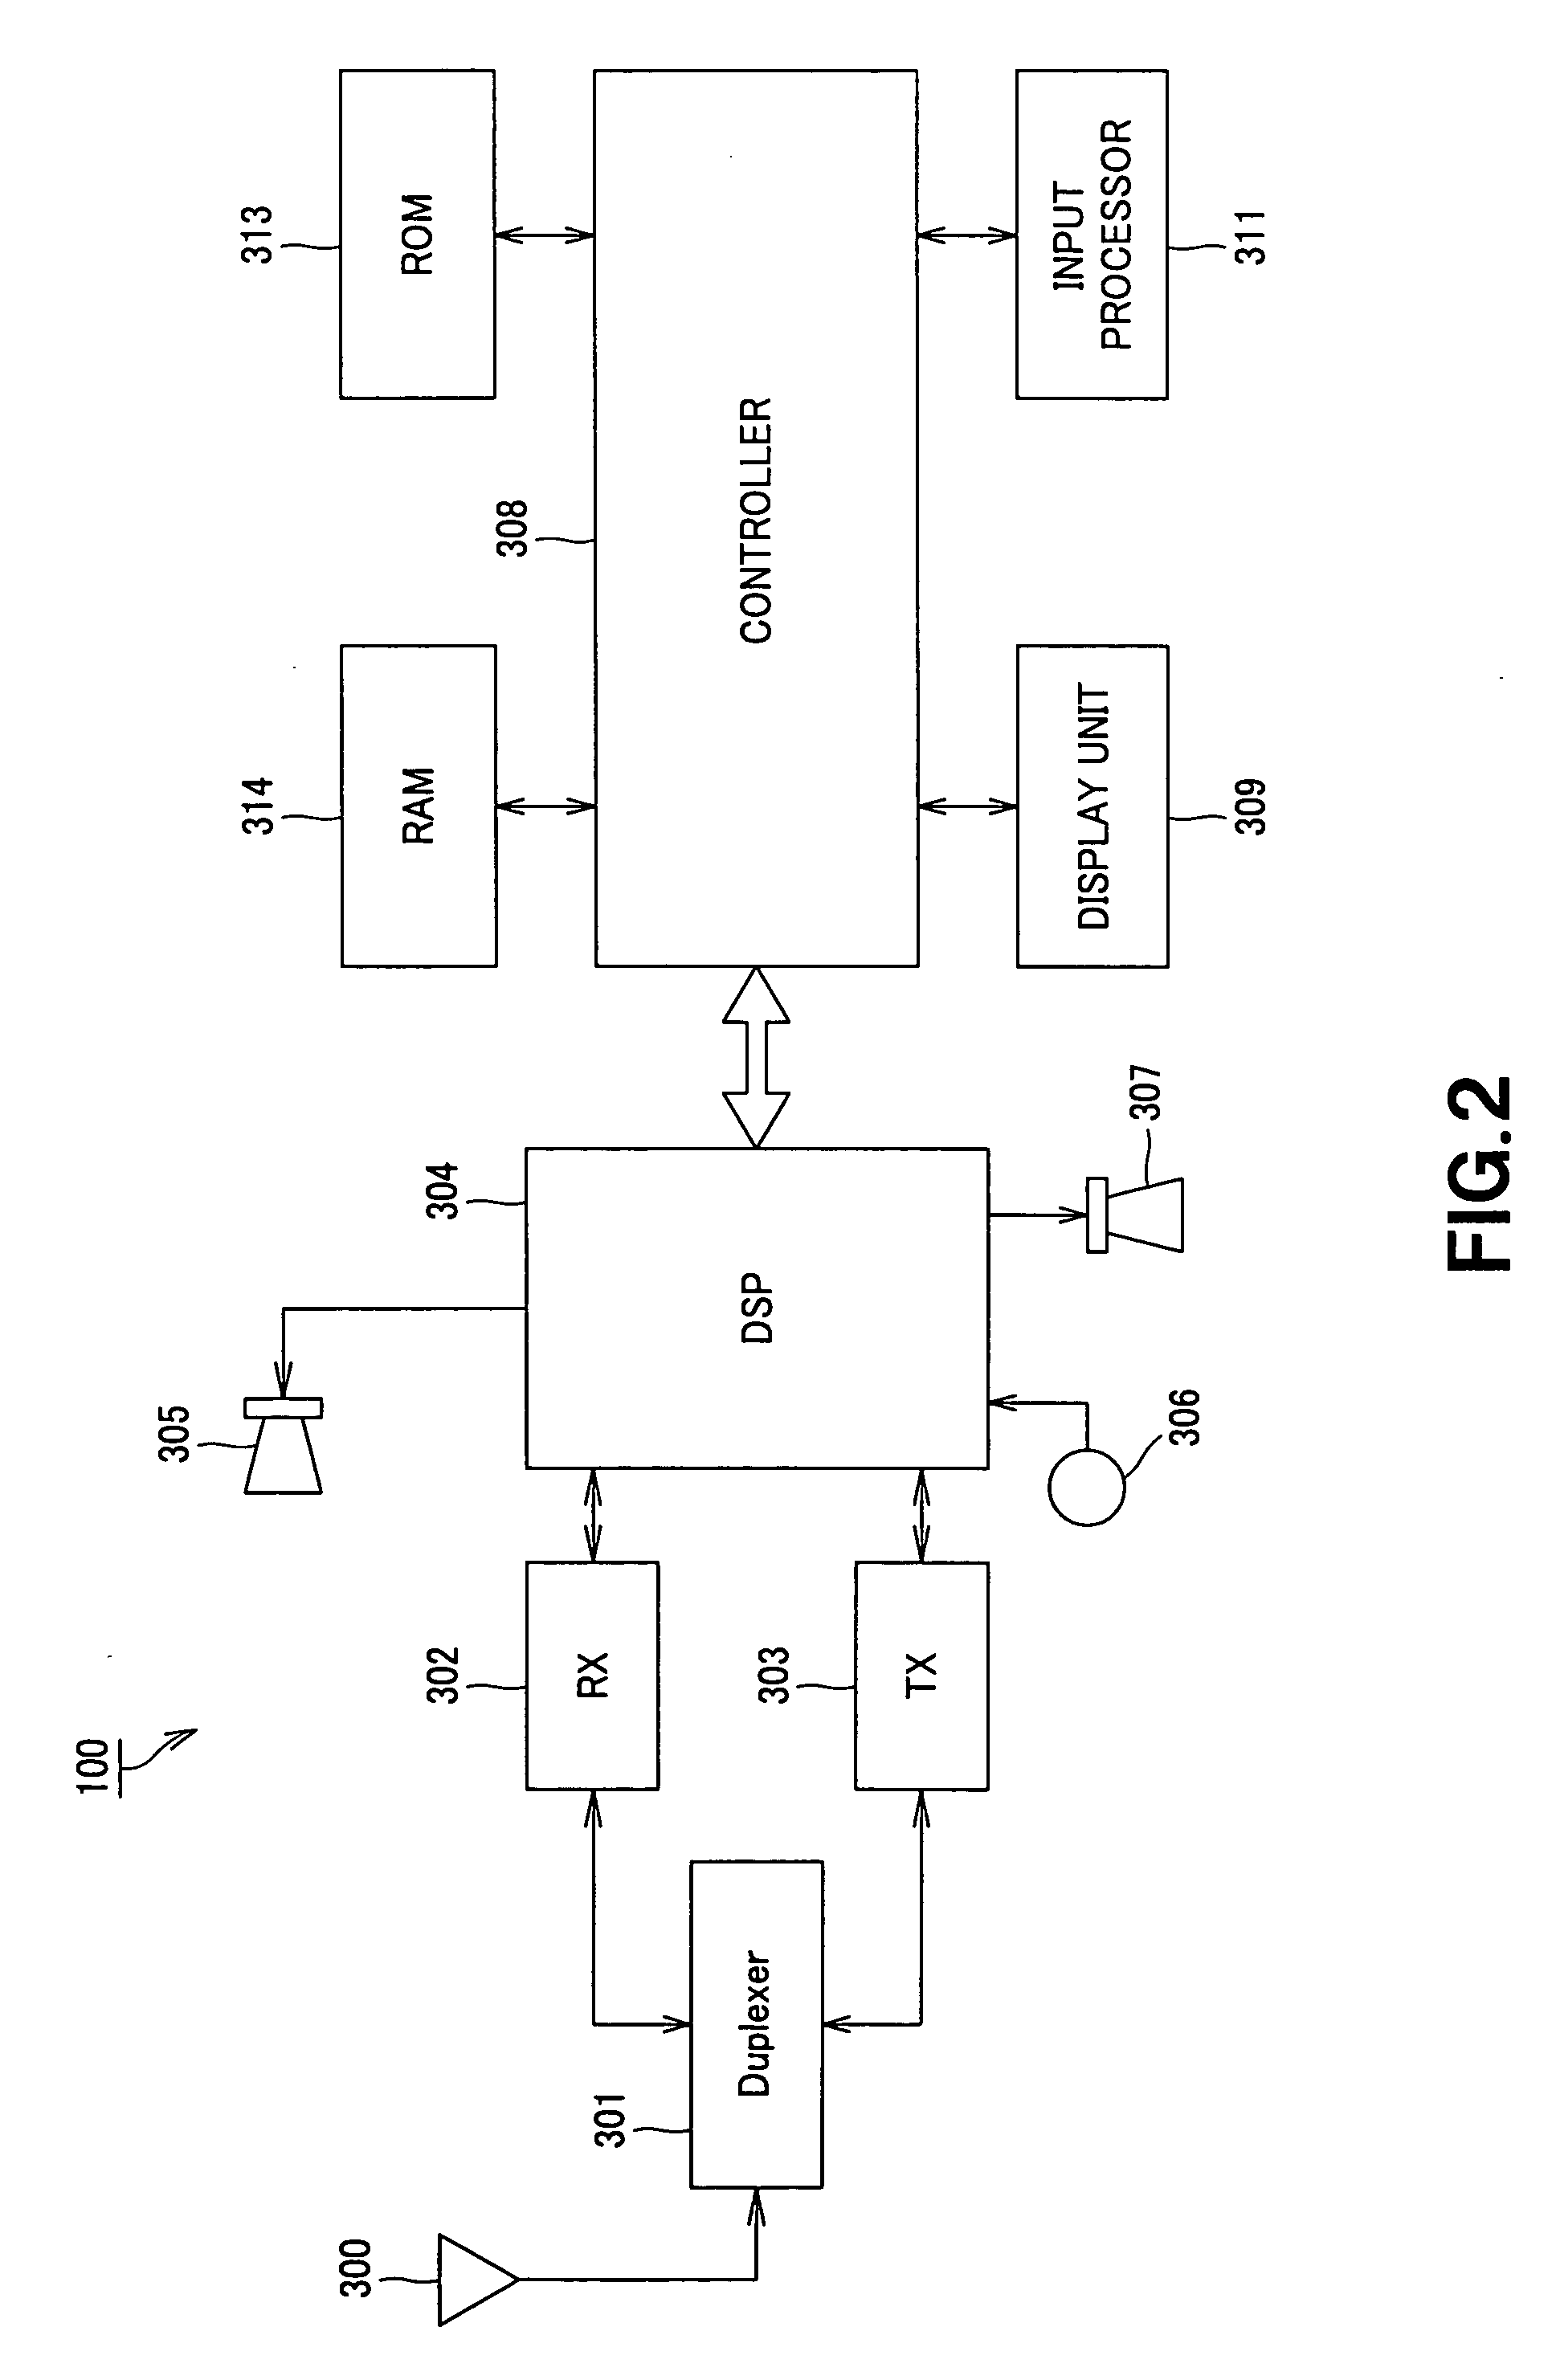 Text display terminal device and server